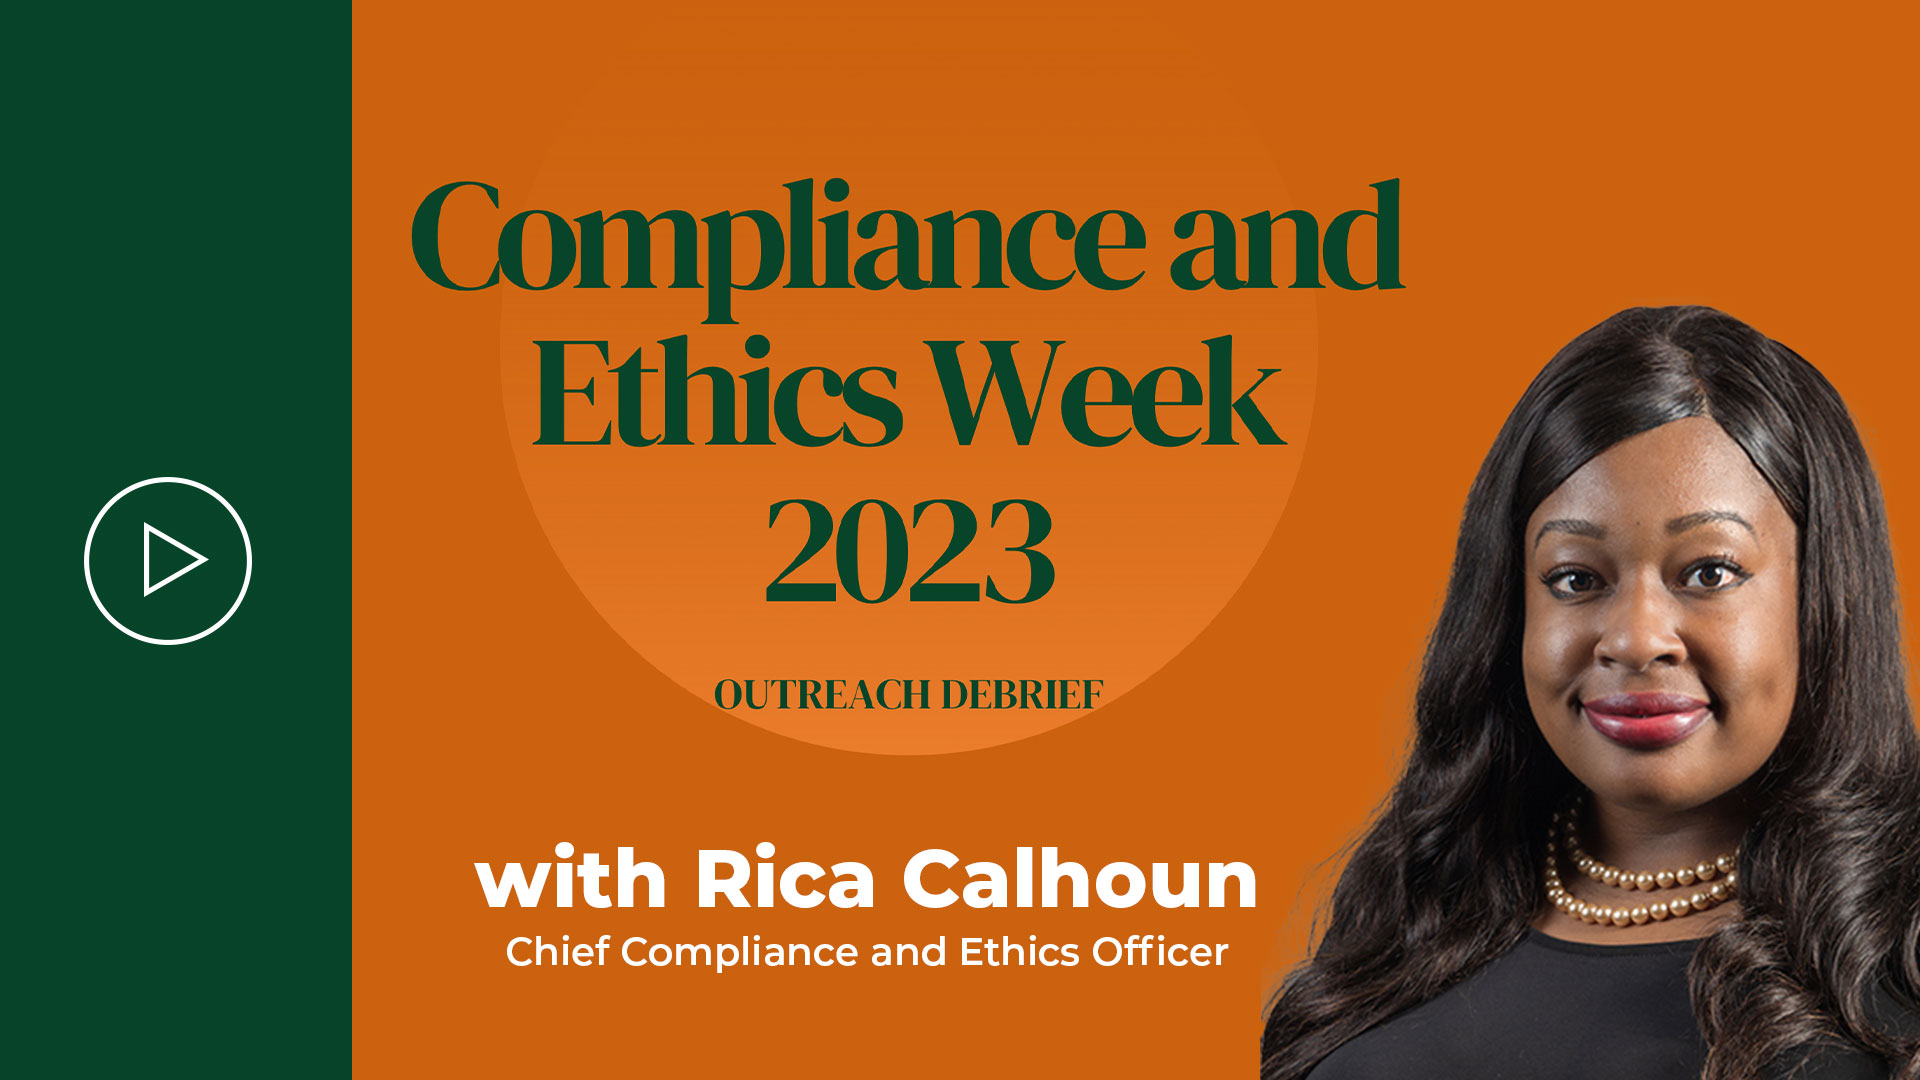 Compliance and Ethics Week 2023 with Rica Calhoun